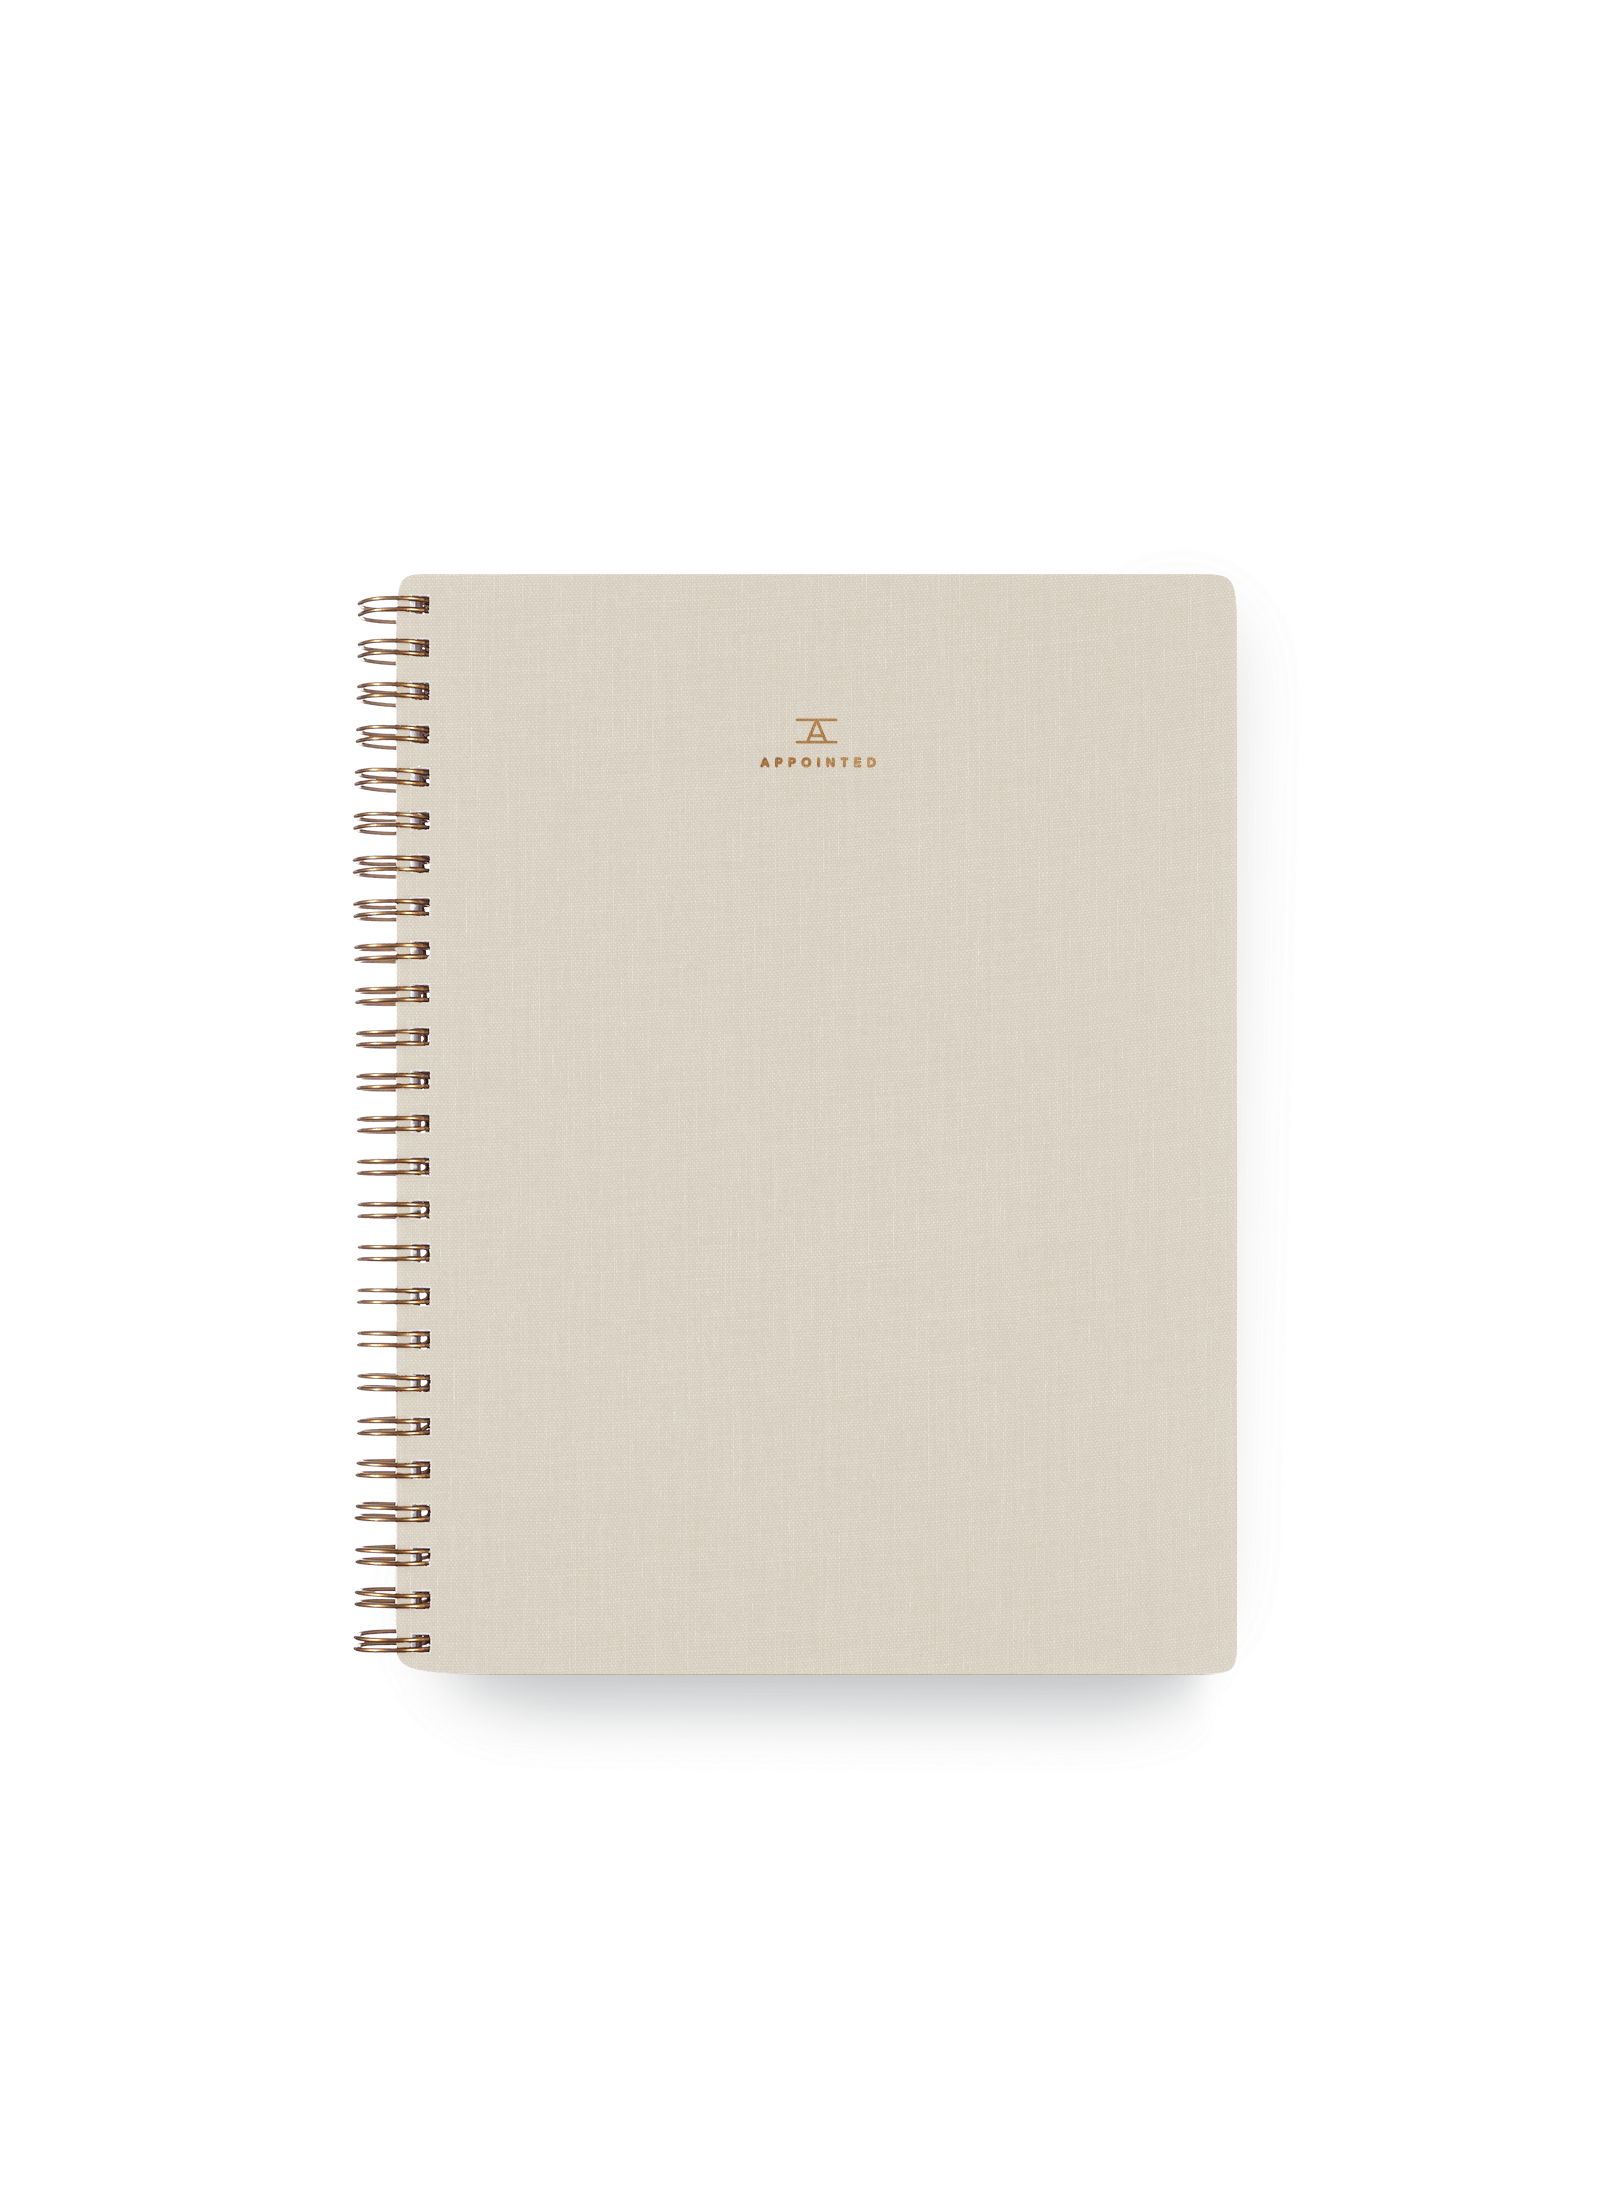 Appointed Workbook in Natural Linen bookcloth with brass wire-o binding front cover || Natural Linen